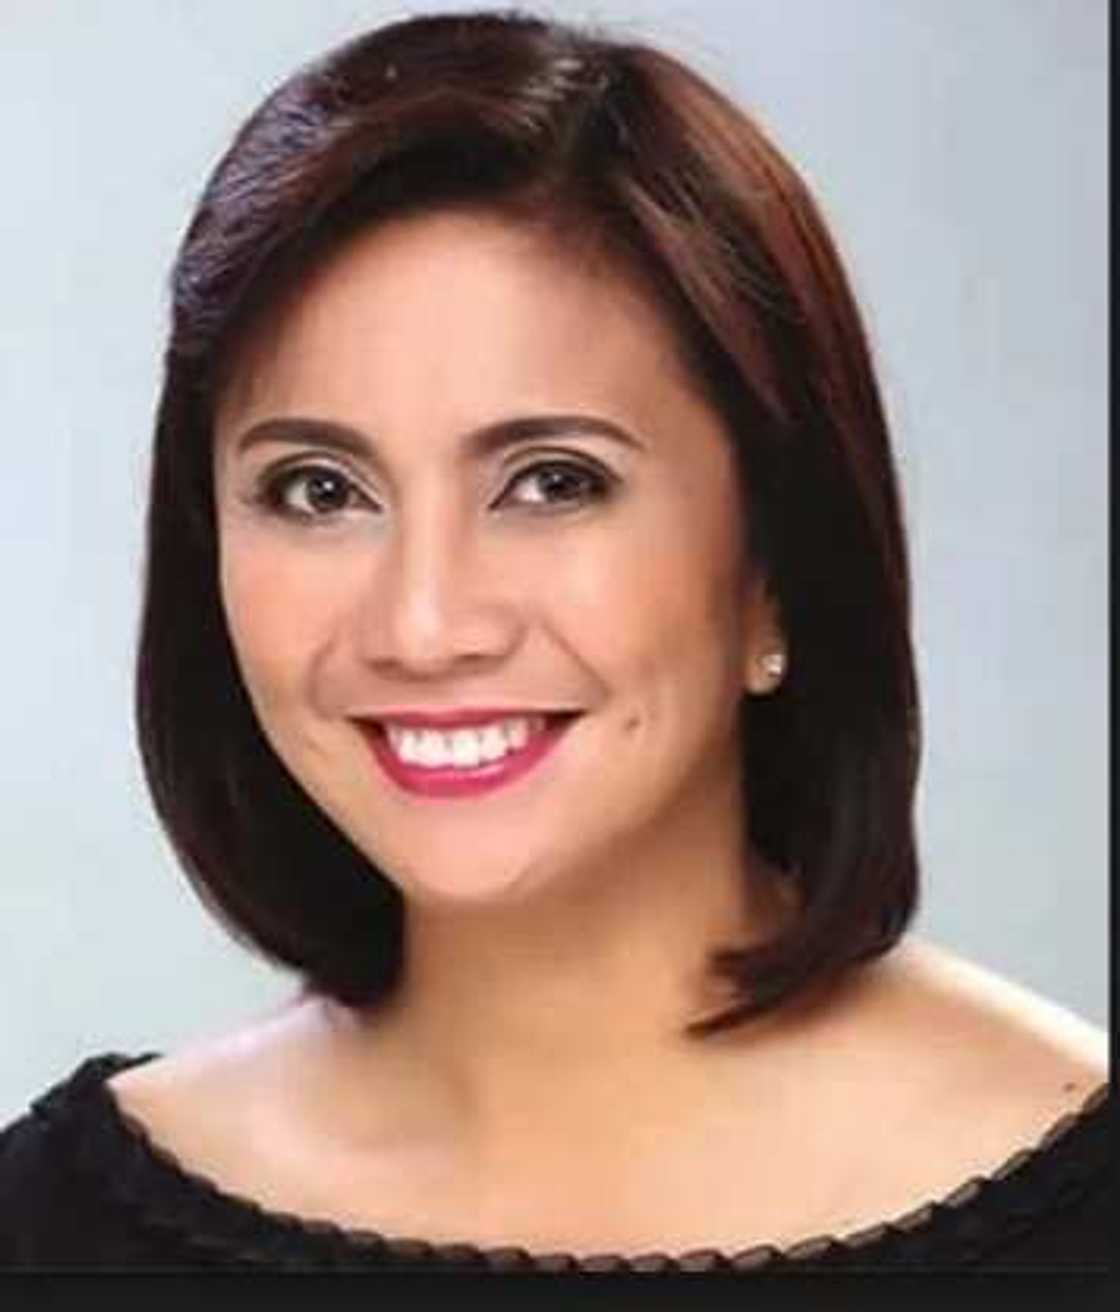 Four promises Robredo made to the Filipino people